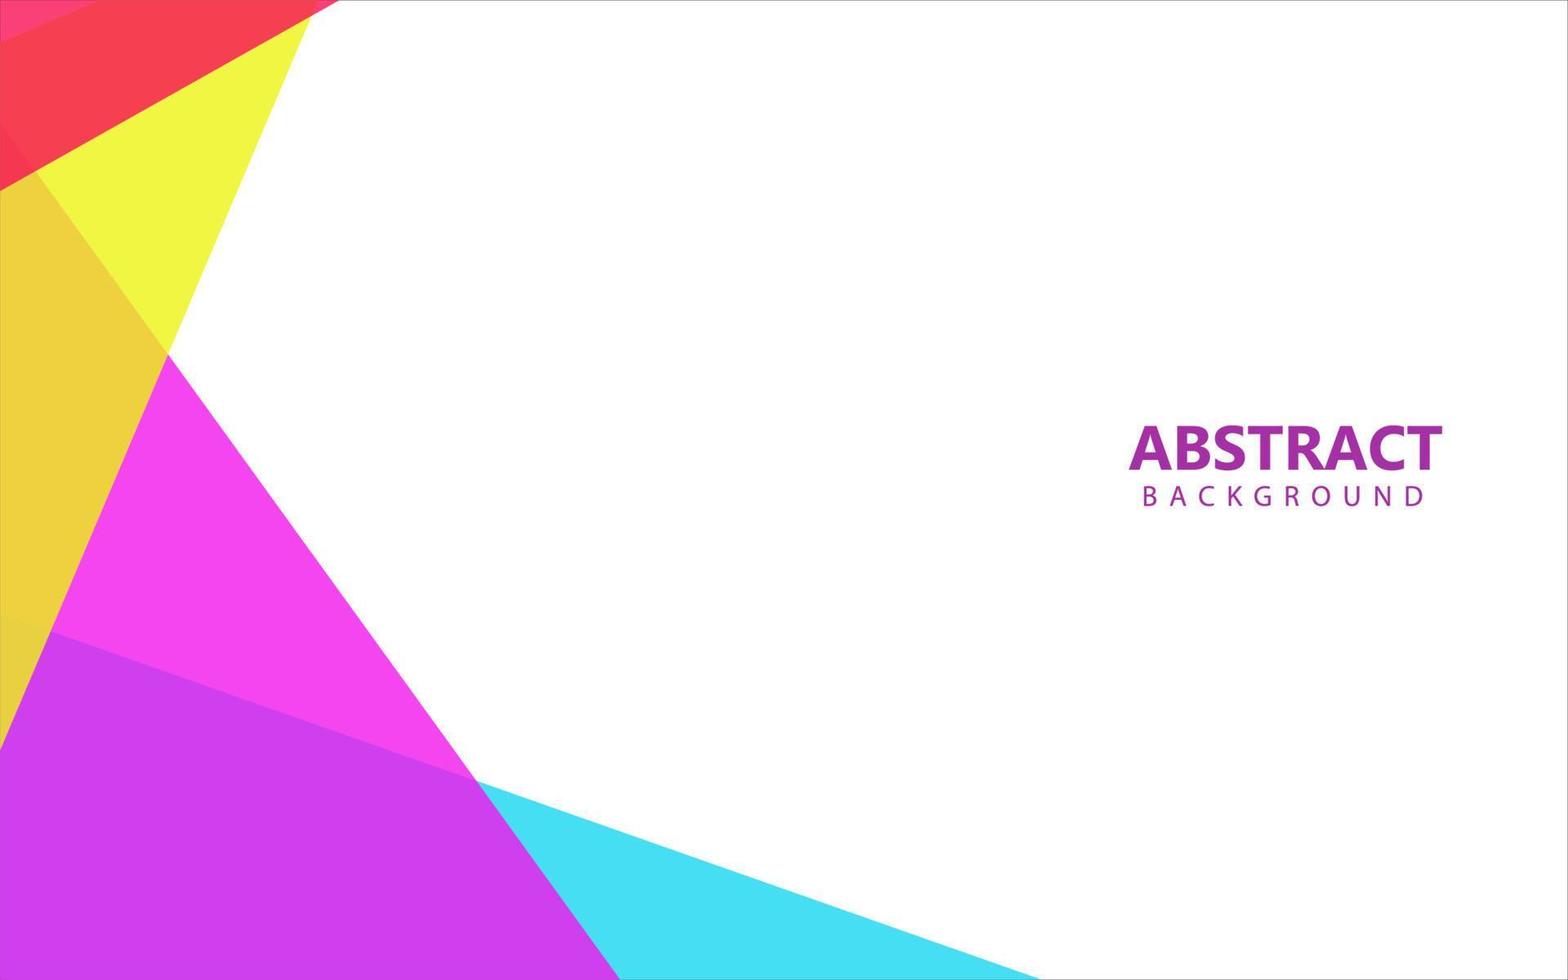 Abstract flat geometric colorful background vector